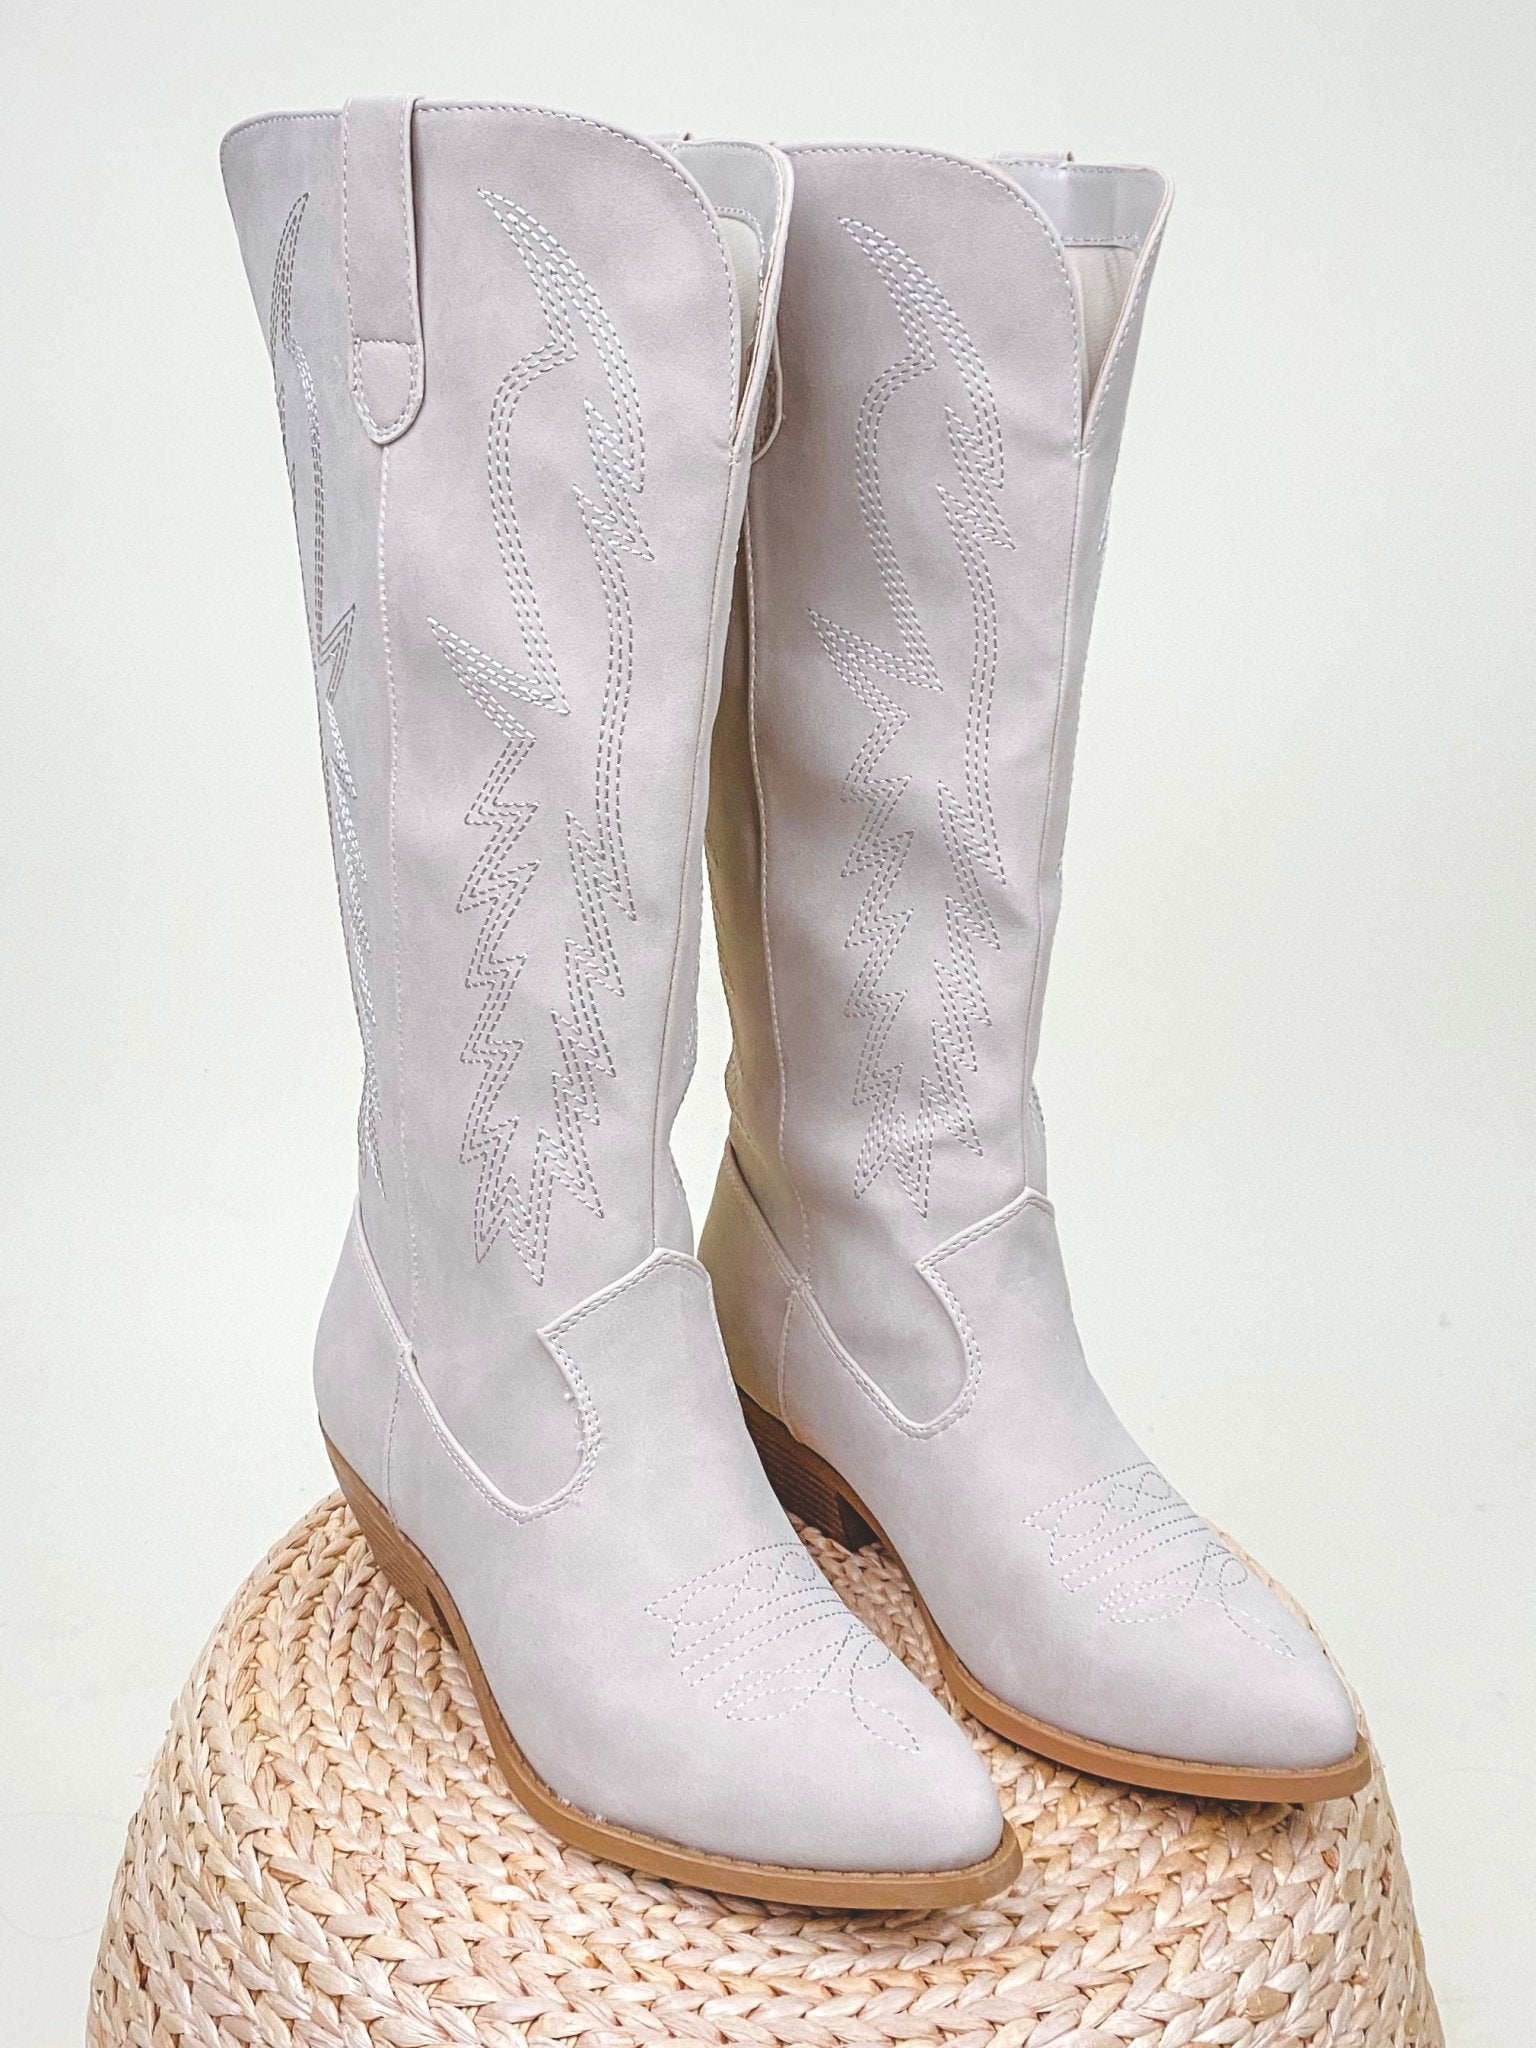 Suede cowboy boots sand - Trendy Shoes - Fashion Shoes at Lush Fashion Lounge Boutique in Oklahoma City